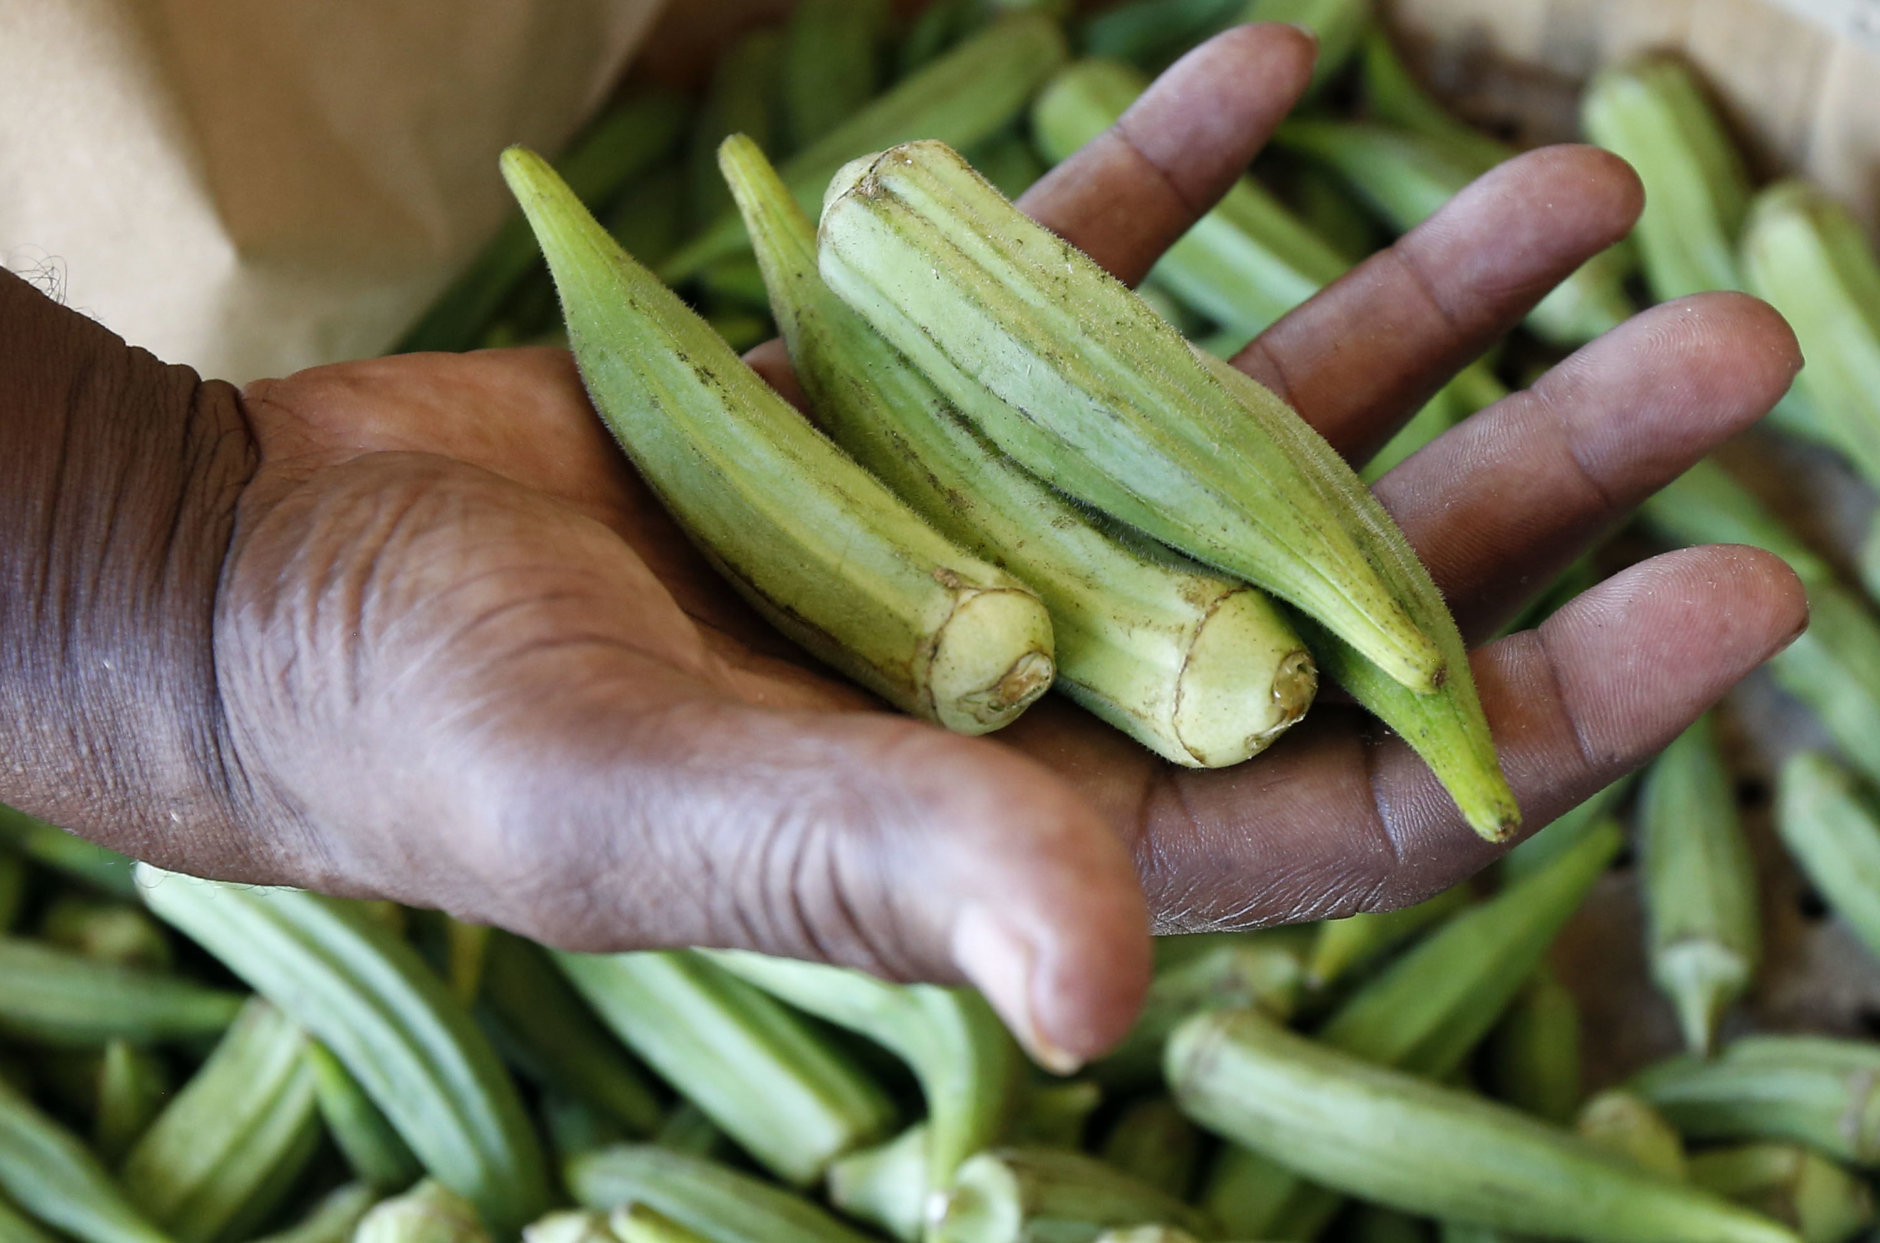 A customer checks the firmness of fresh okra at Doris Berry Produce stand in Jackson, Miss., Wednesday, July 15, 2015. A recent survey indicates Mississippi adults are last in eating vegetables but they are not alone. Most U.S. adults still aren't eating nearly enough fruits and vegetables with only 13 percent saying they eat the required amount of fruit each day and only 9 percent eating enough vegetables. (AP Photo/Rogelio V. Solis)